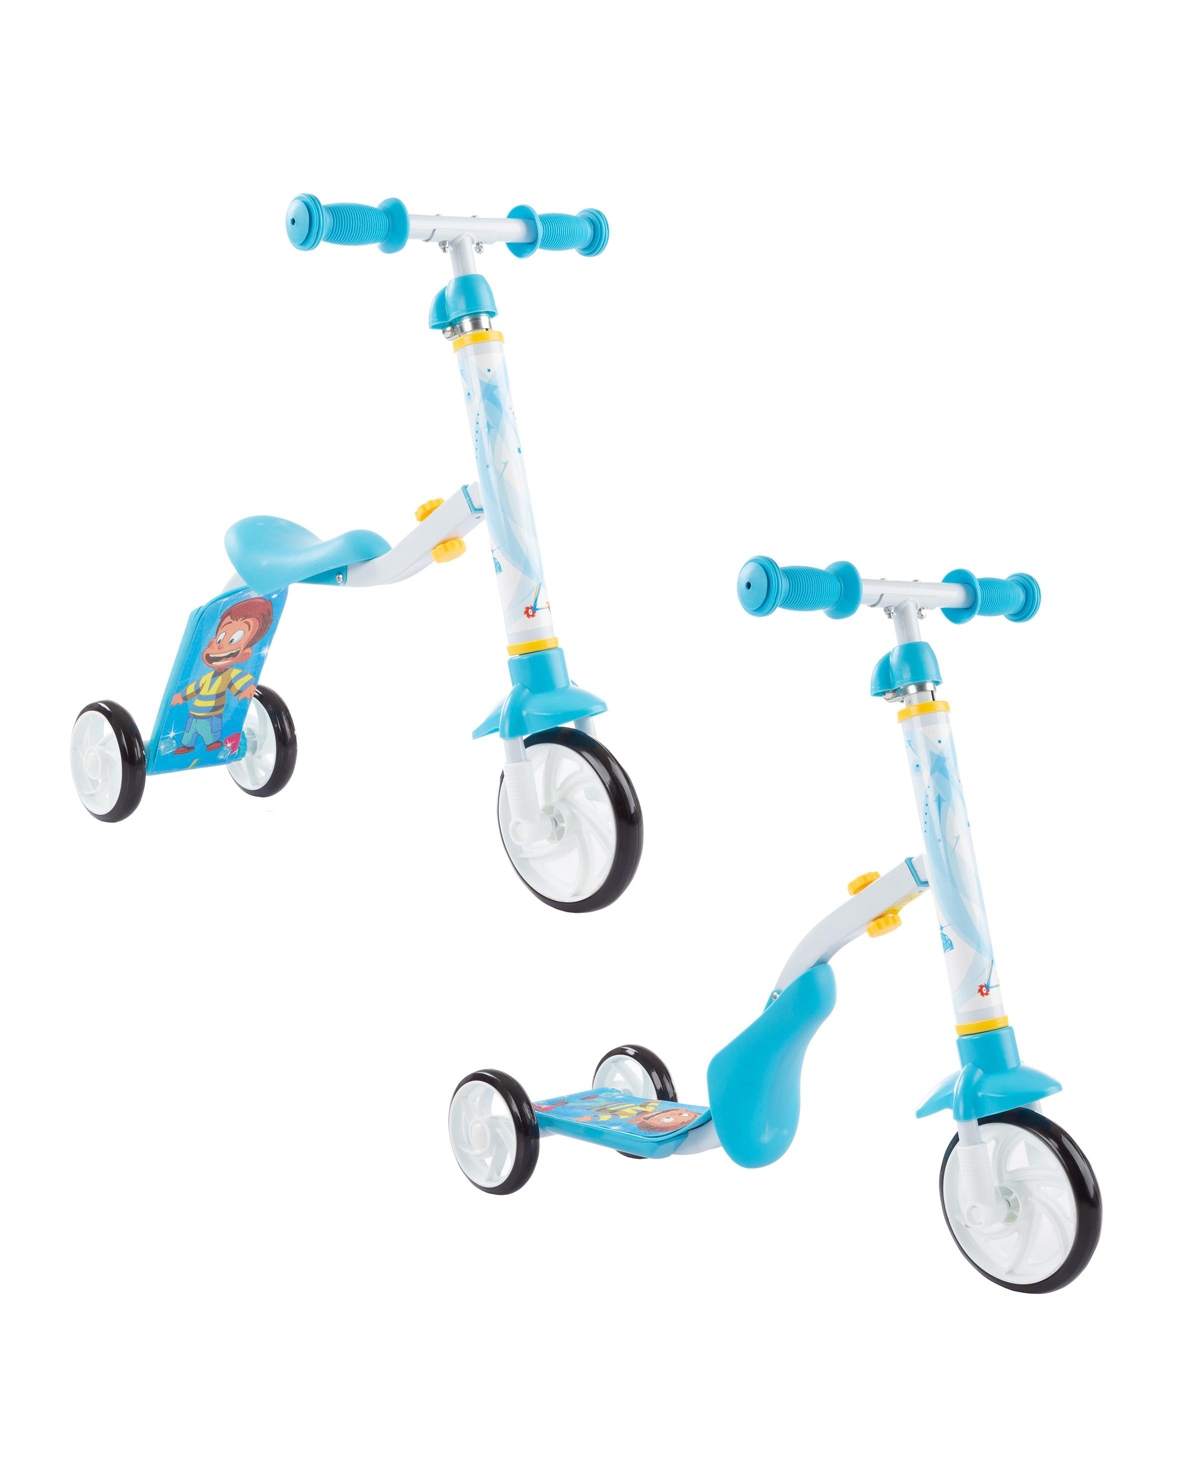 Lil' Rider 2-in-1 Convertible Scooter In Blue,white